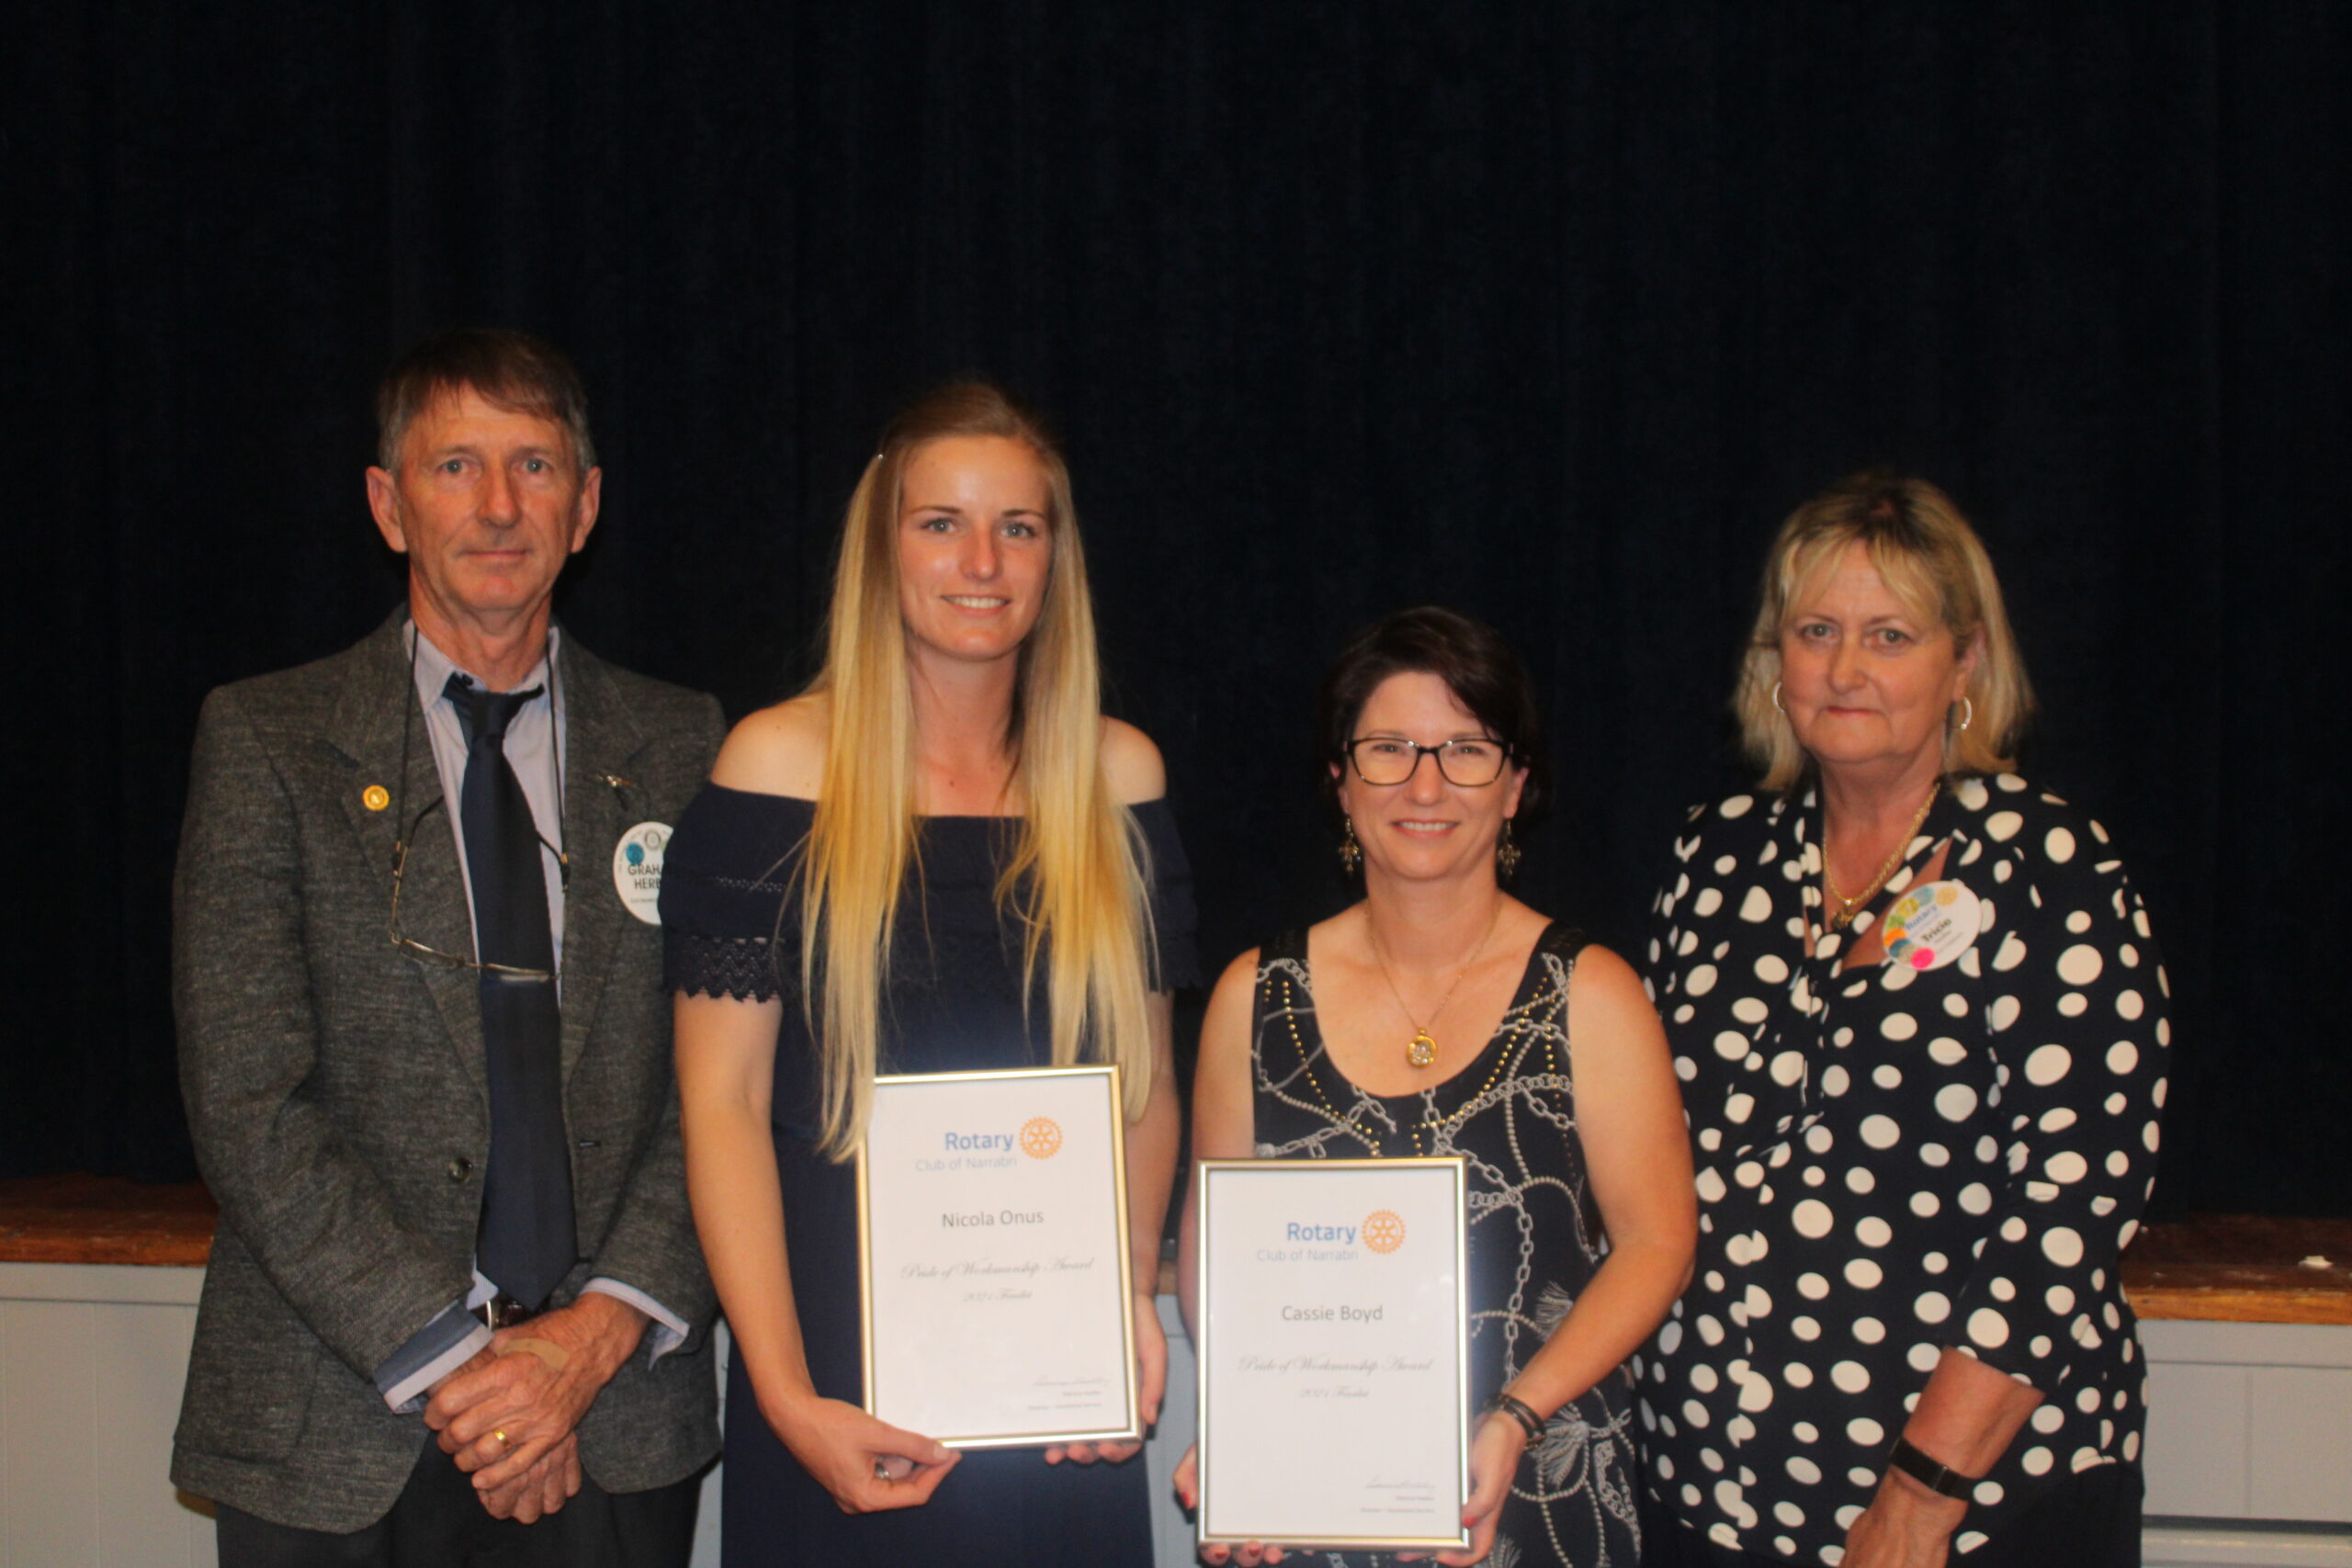 Grahame Herbert (2020/21 outgoing president of Rotary Club of Narrabri) with Pride of Workmanship award runners-up Nicola Onus and Cassie Boyd and Rotary Narrabri’s vocational director Tricia Hadley.